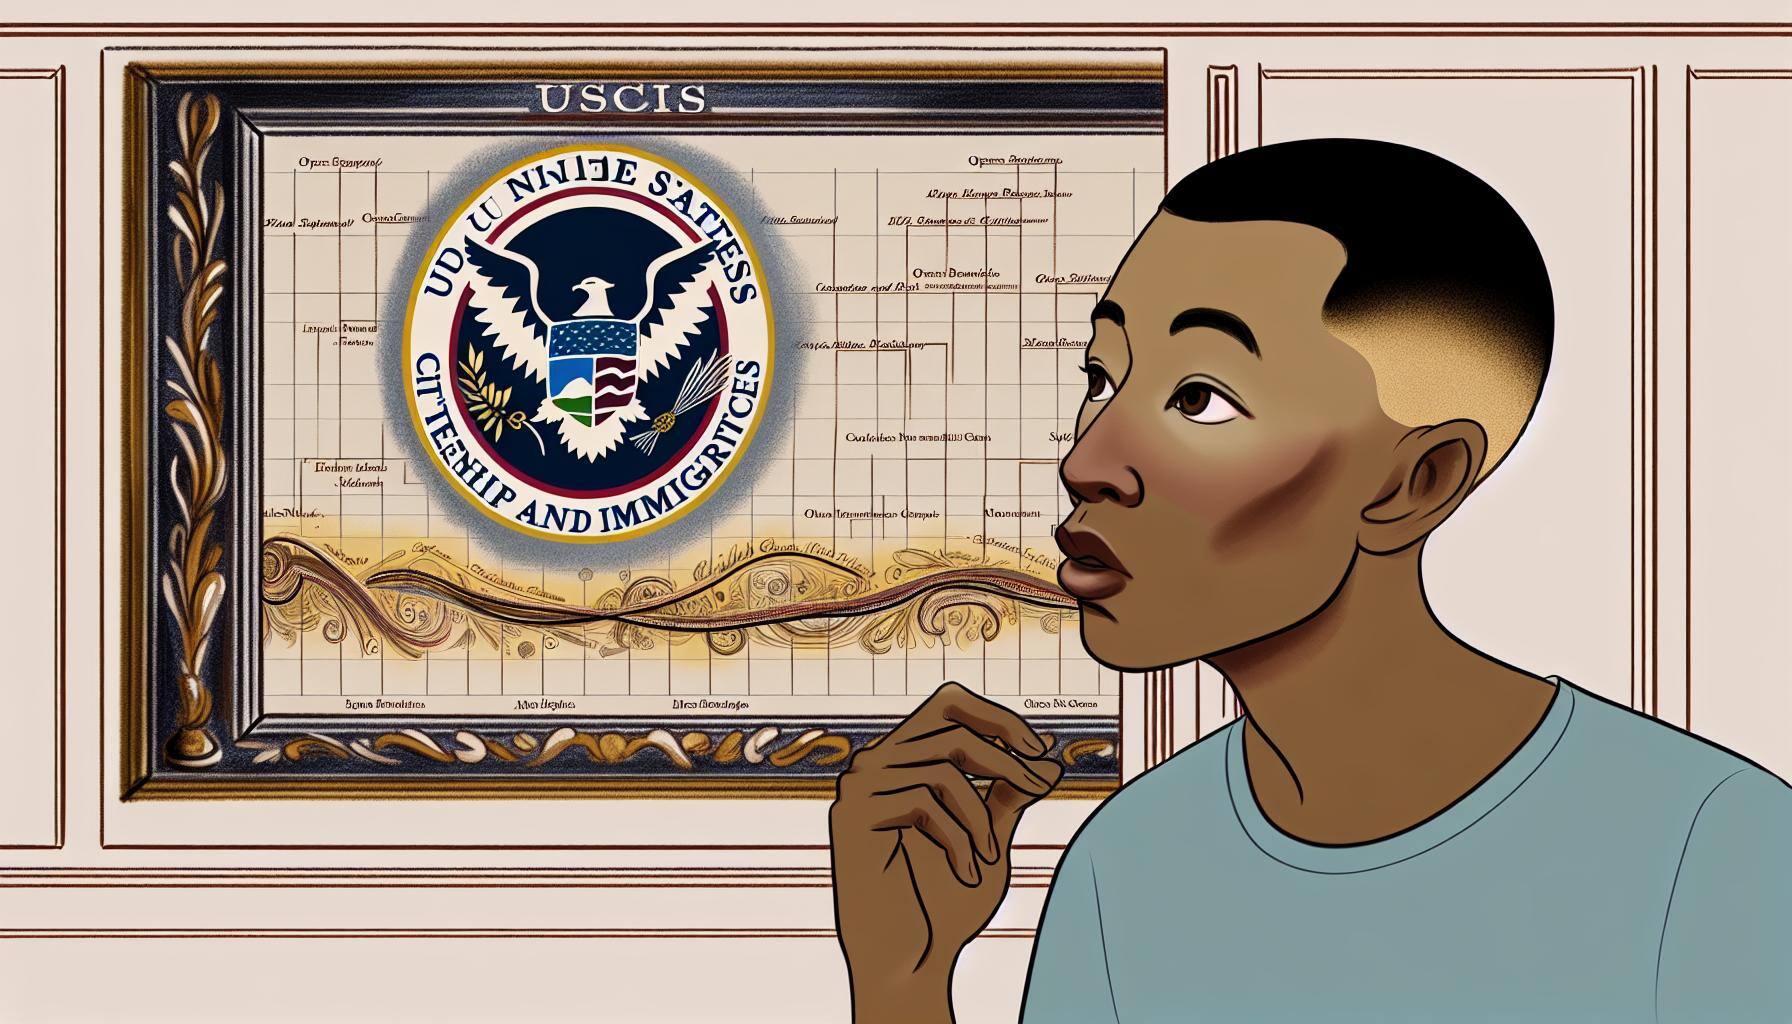 size 64content a person who is curious about how the timeline is like, and at his background, on the wall, theres a logo of uscis with the entire na